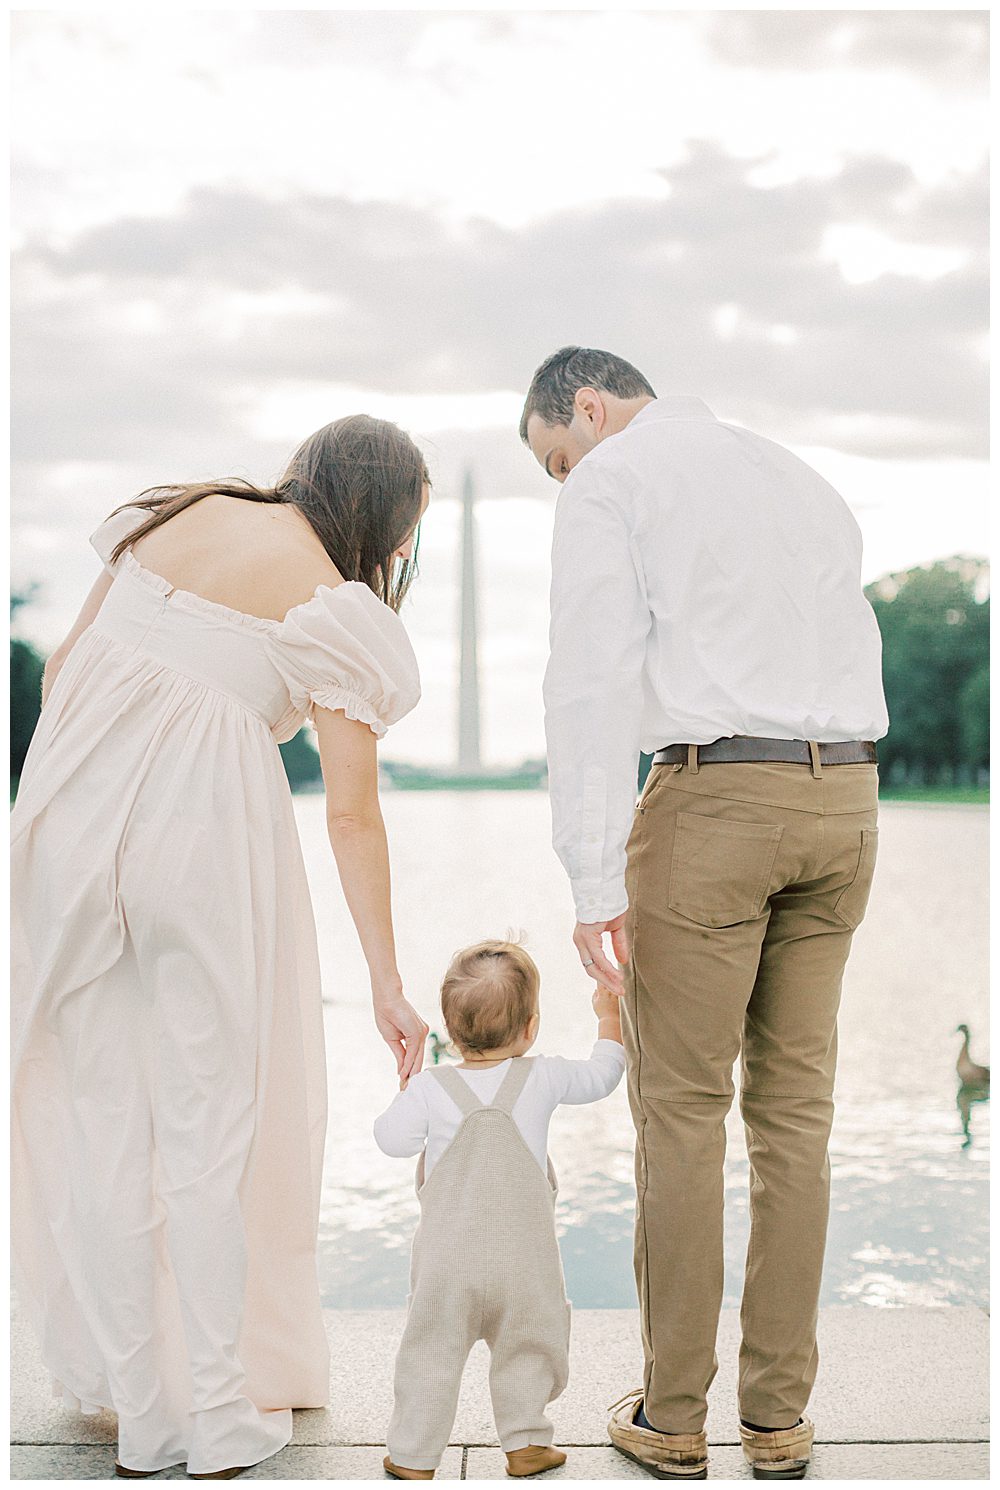 Parents lean down and hold toddler's hands while standing, looking out at DC reflecting pool during DC Monuments Family Photo Session.